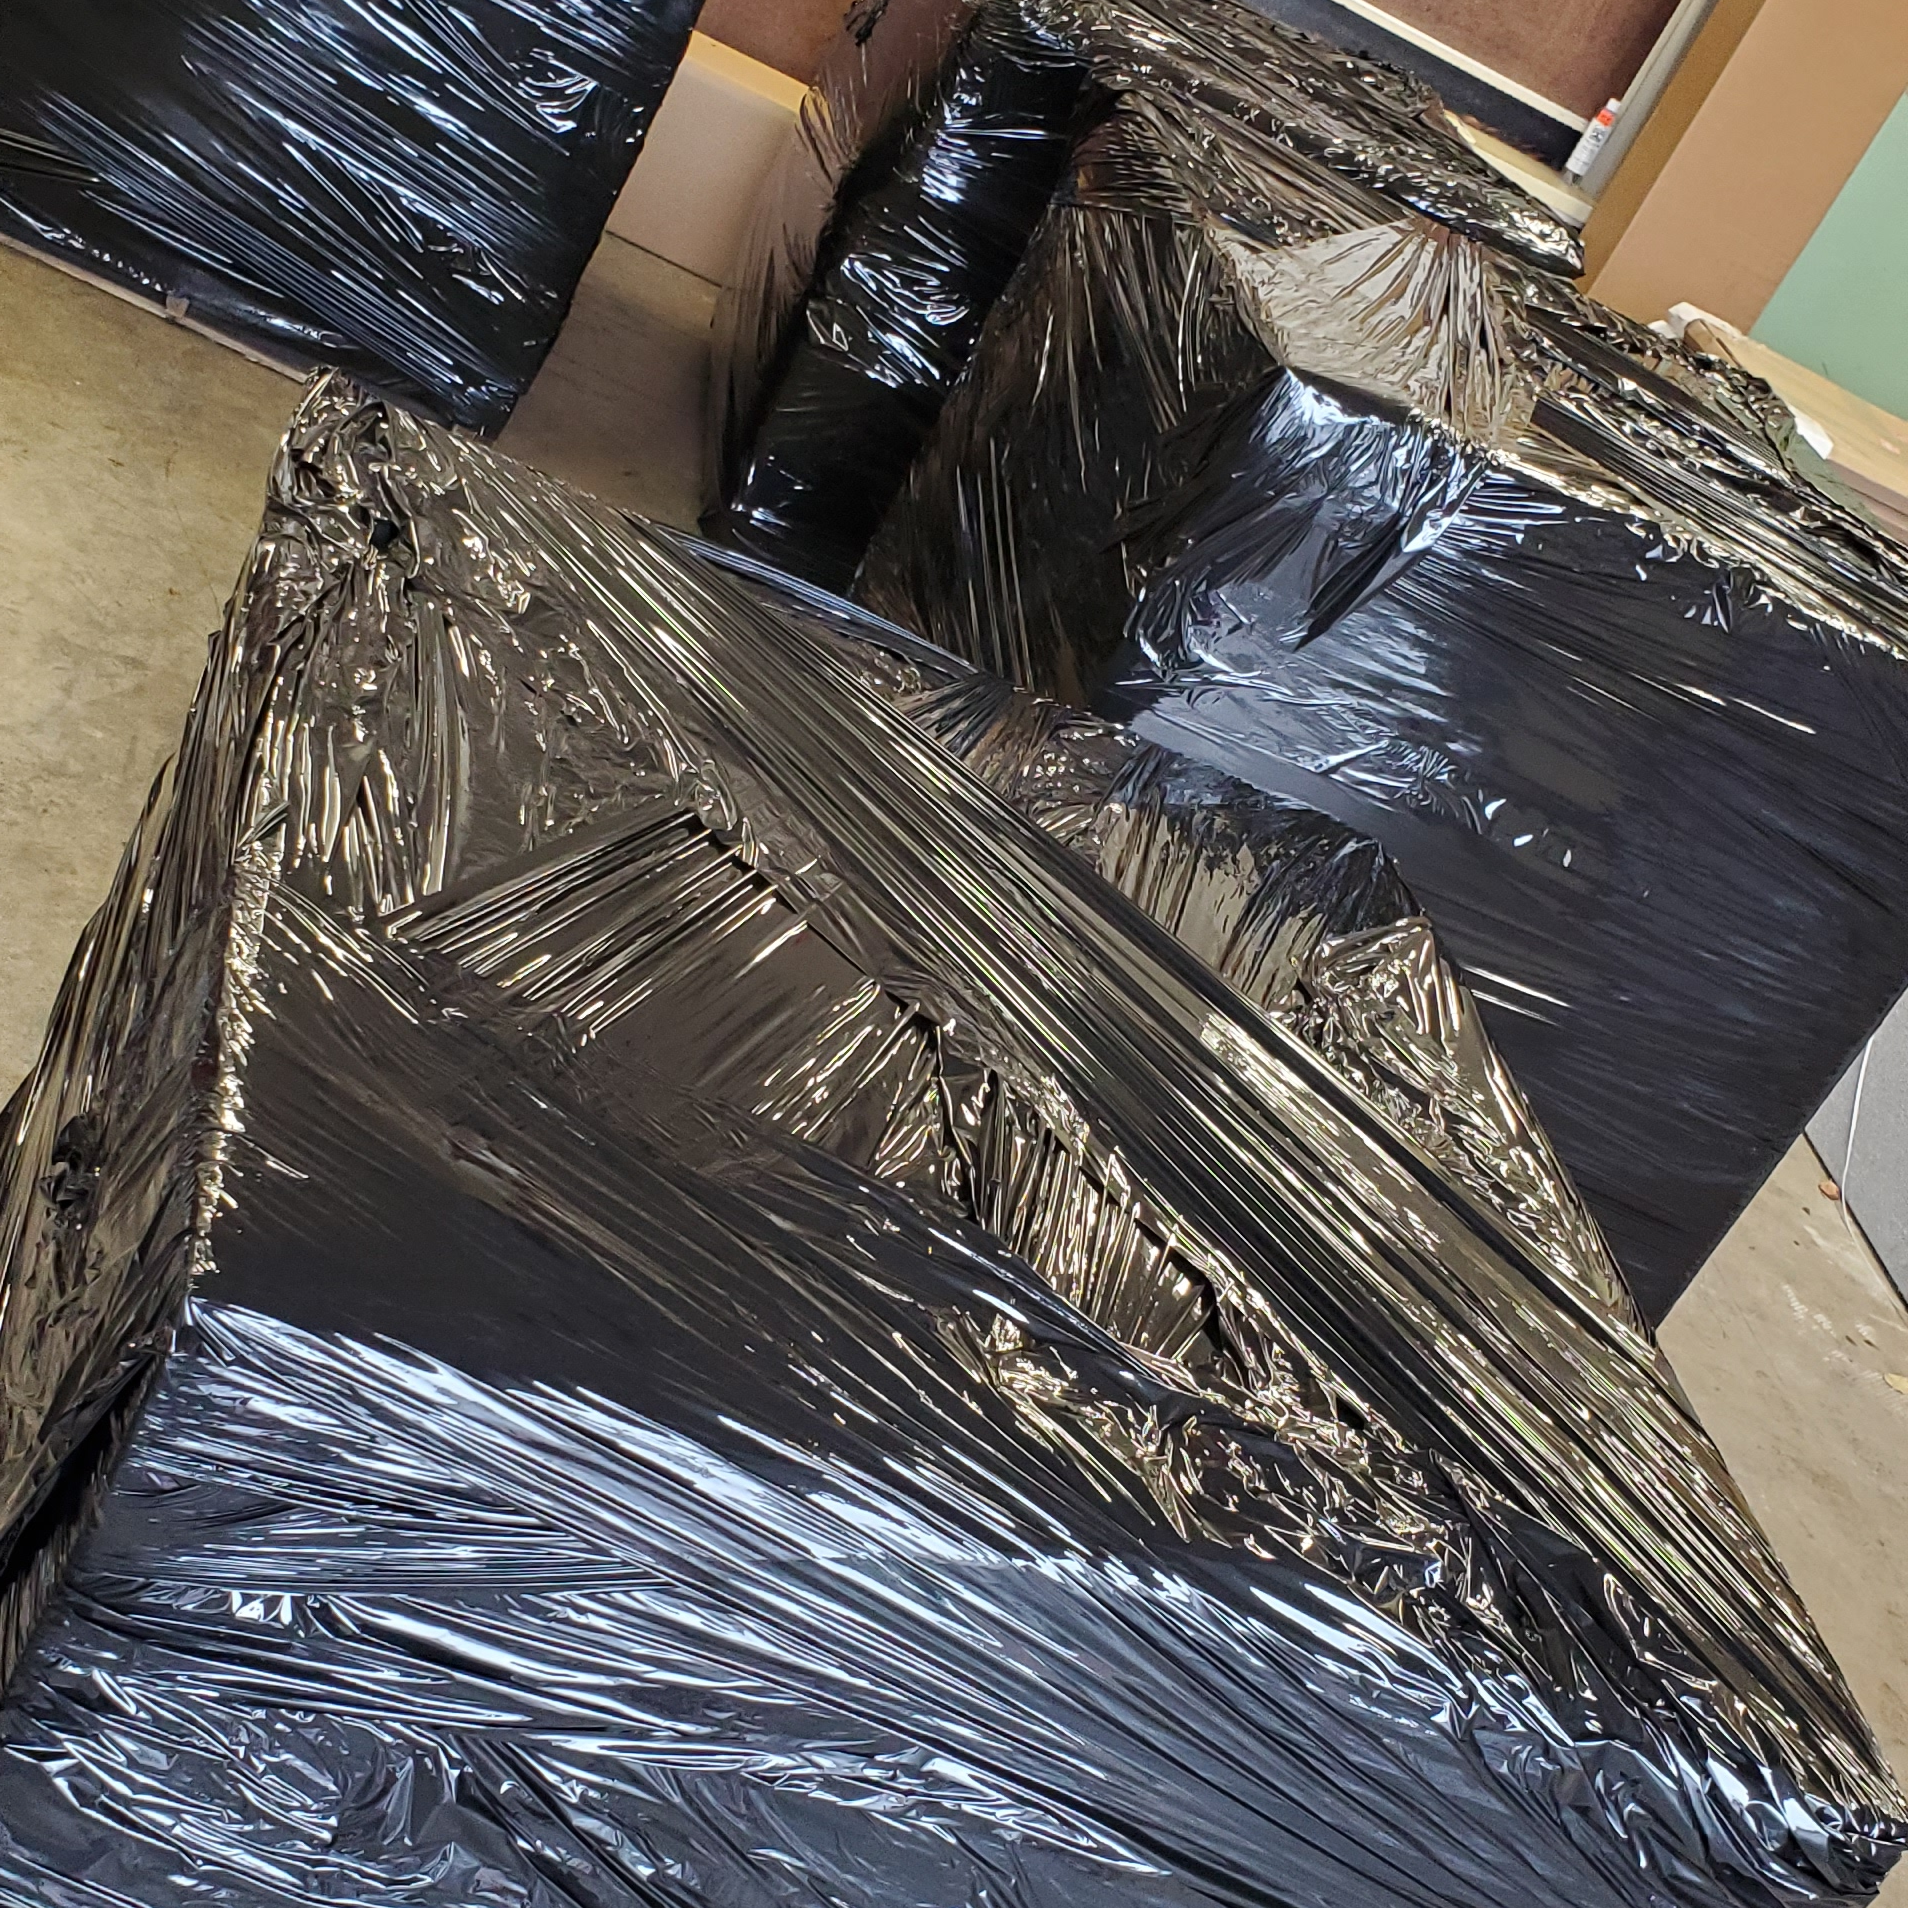 4 large pallets filled and wrapped up with black and clear wrapping.